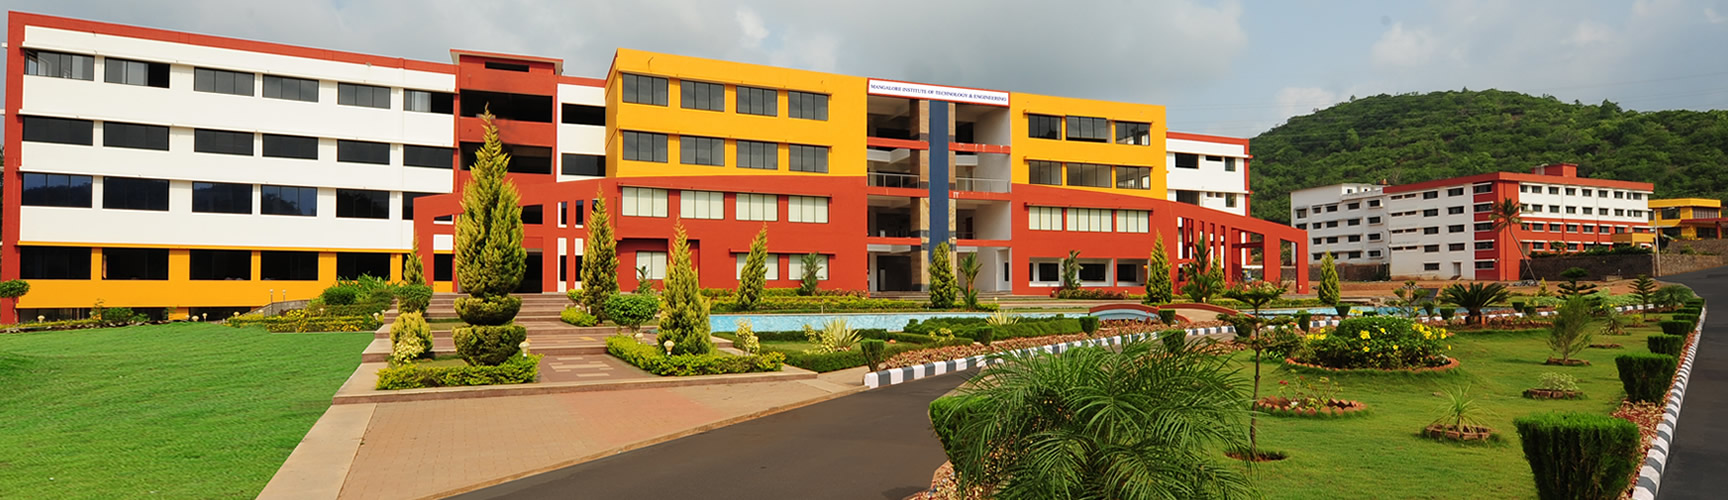 Mangalore Institute of Technology and Engineering (MITE)